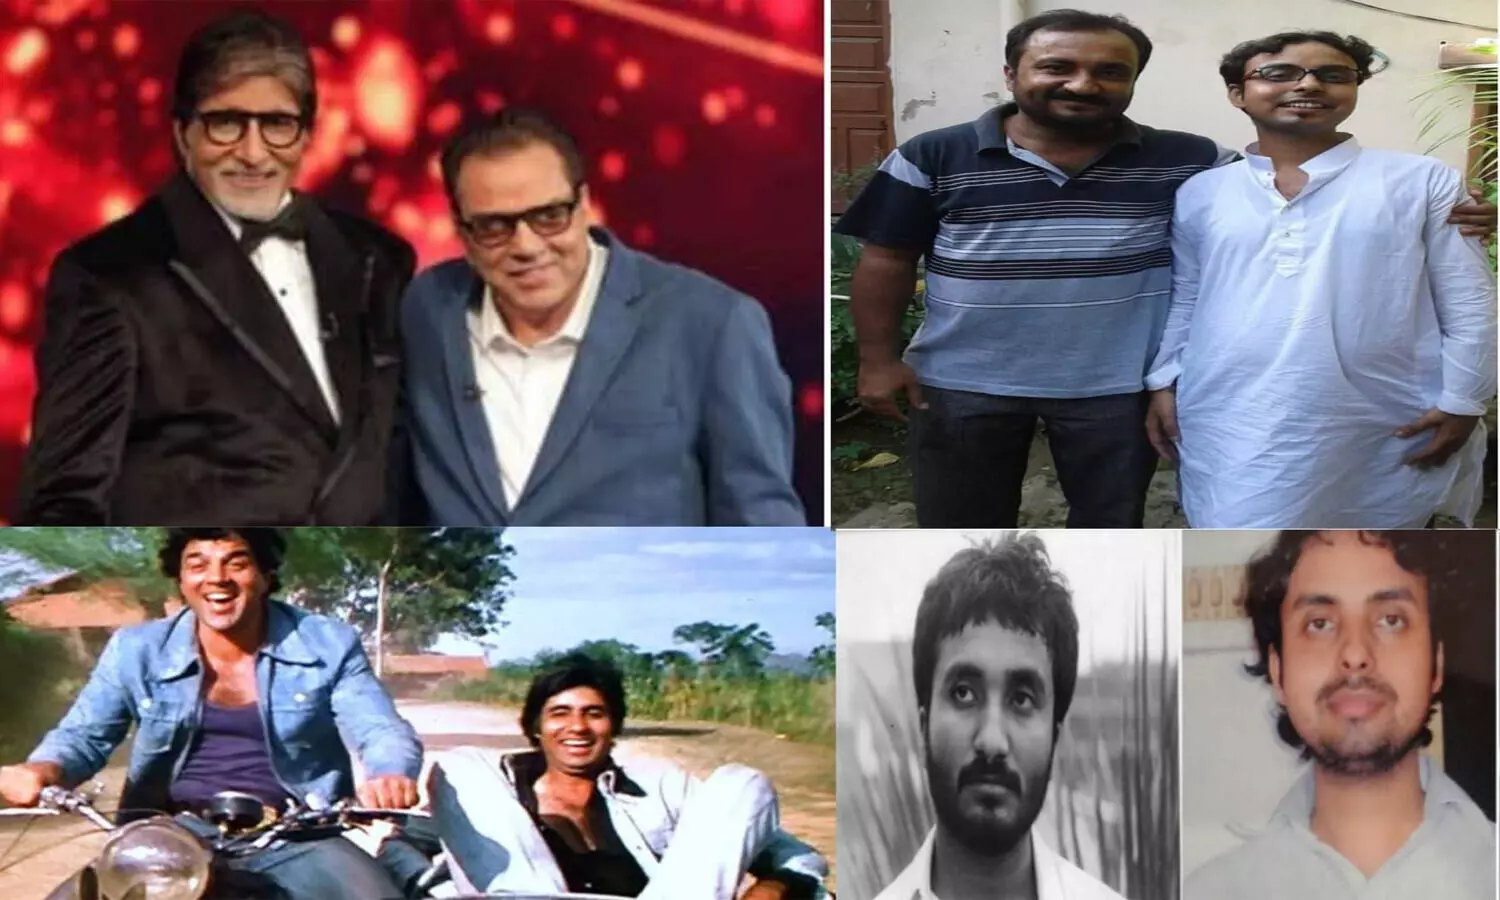 Friendship Day Special: RK Srivastava & Anand Kumar are like Jai and Veeru from Sholay